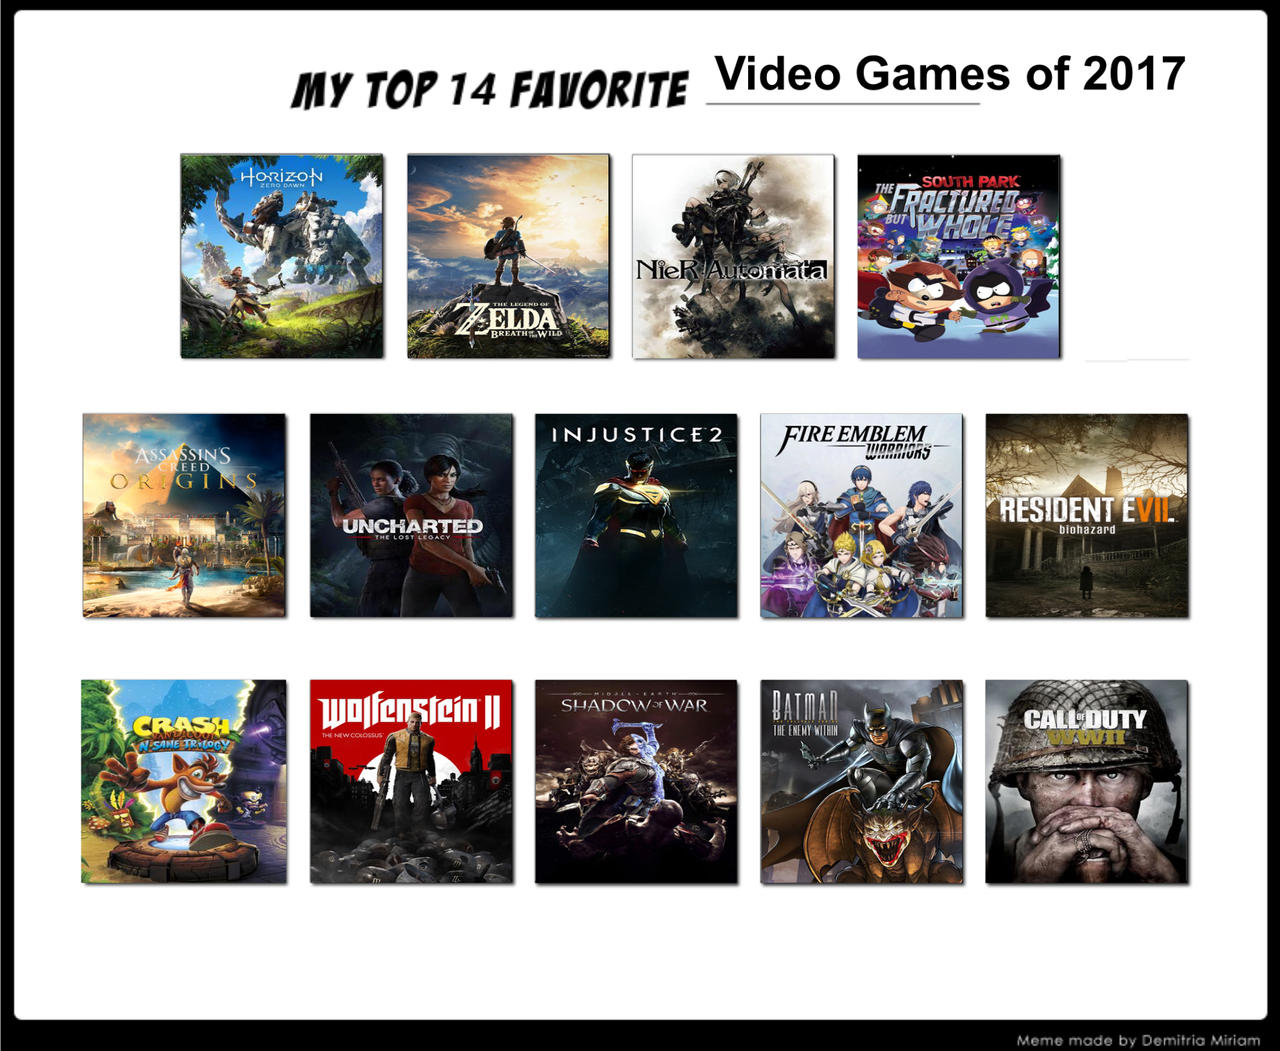 The Top 10 Games I Played in 2017